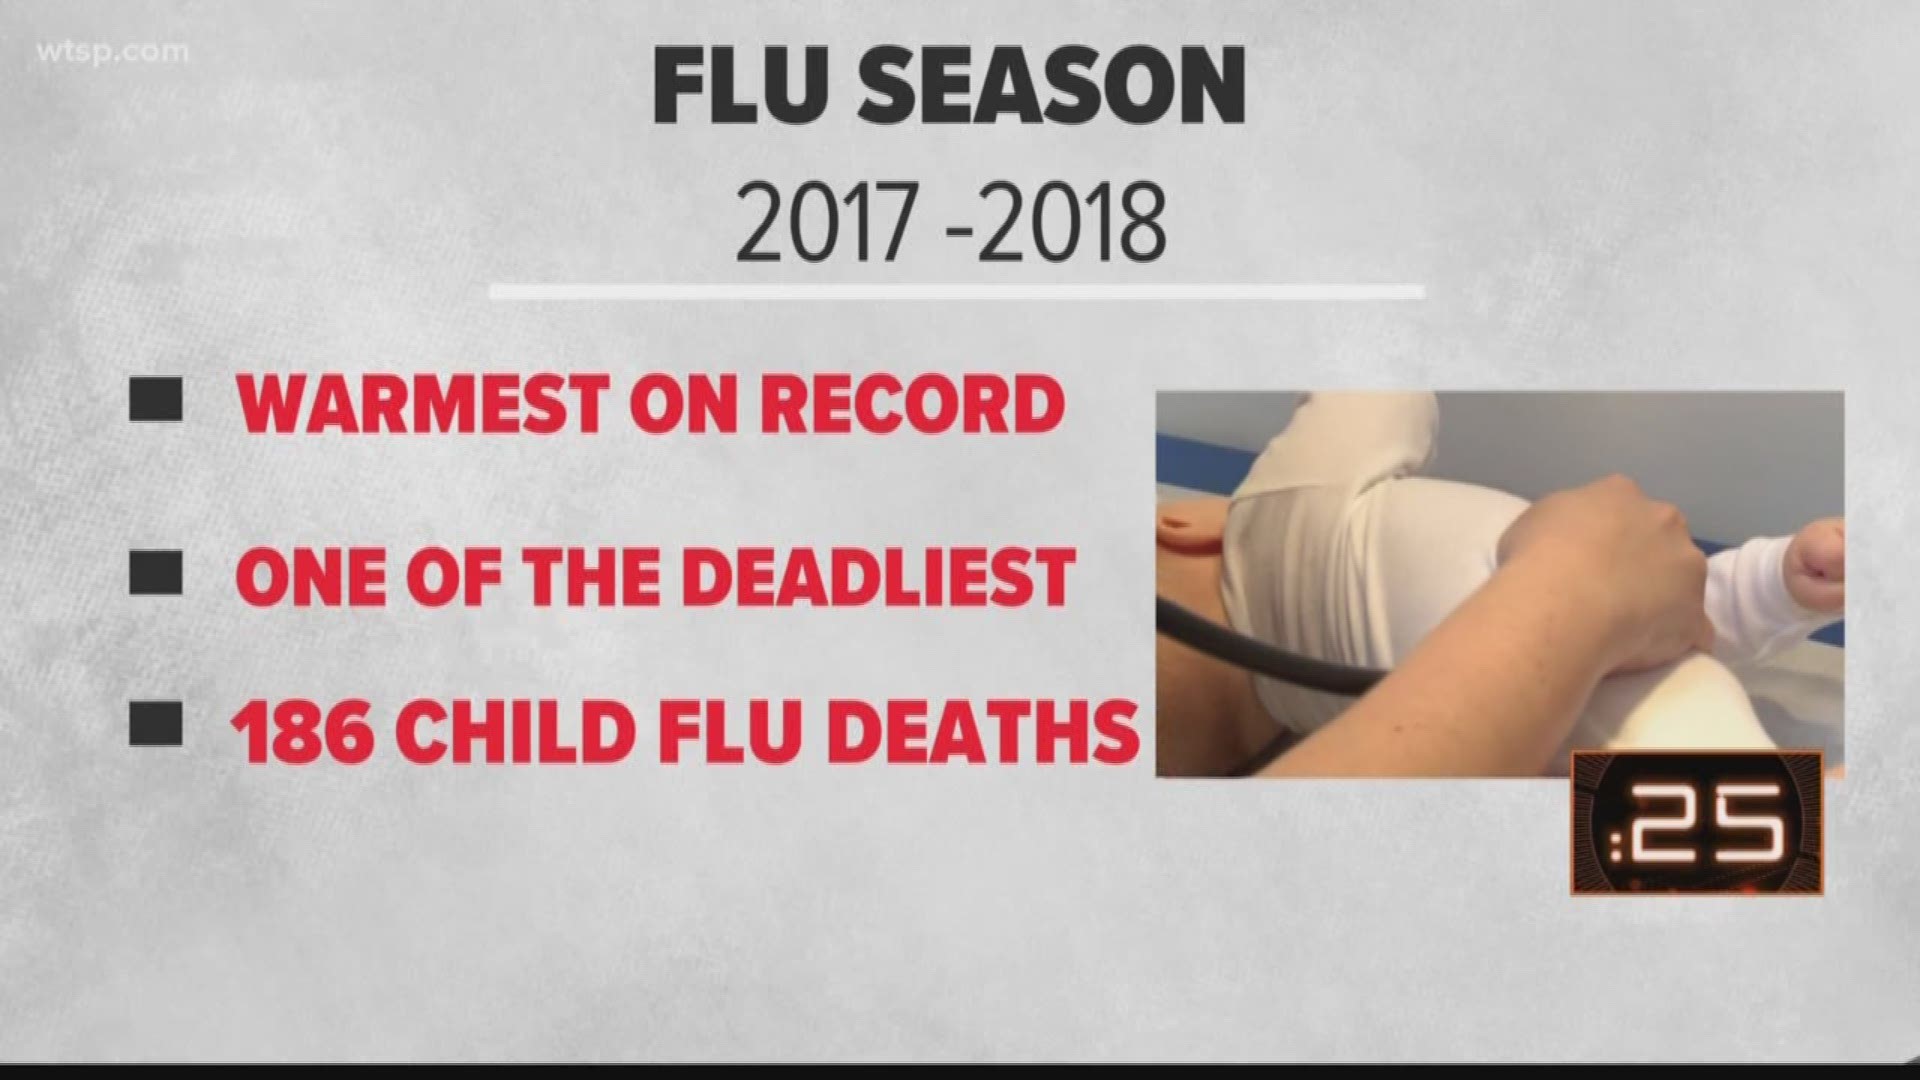 10News meteorologist Grant Gilmore takes a look at how the weather could increase your chance of getting the flu.